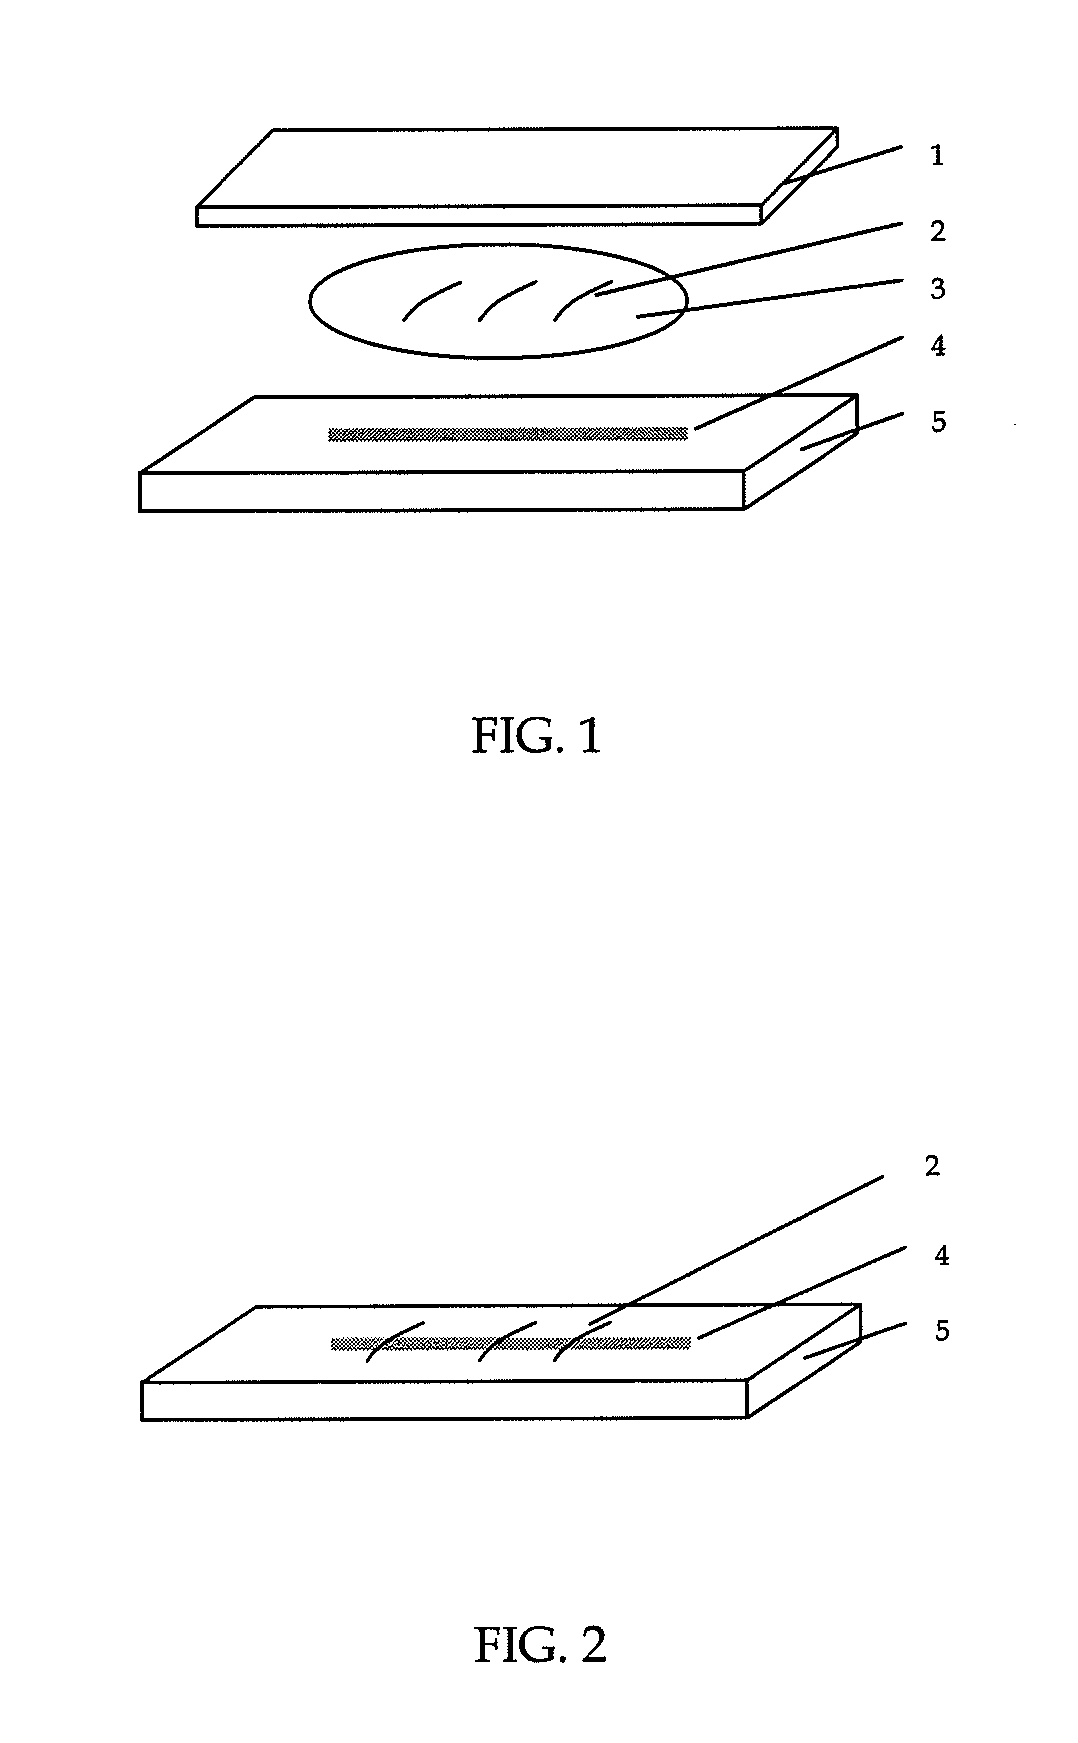 Method for measuring deformability properties of a fibre